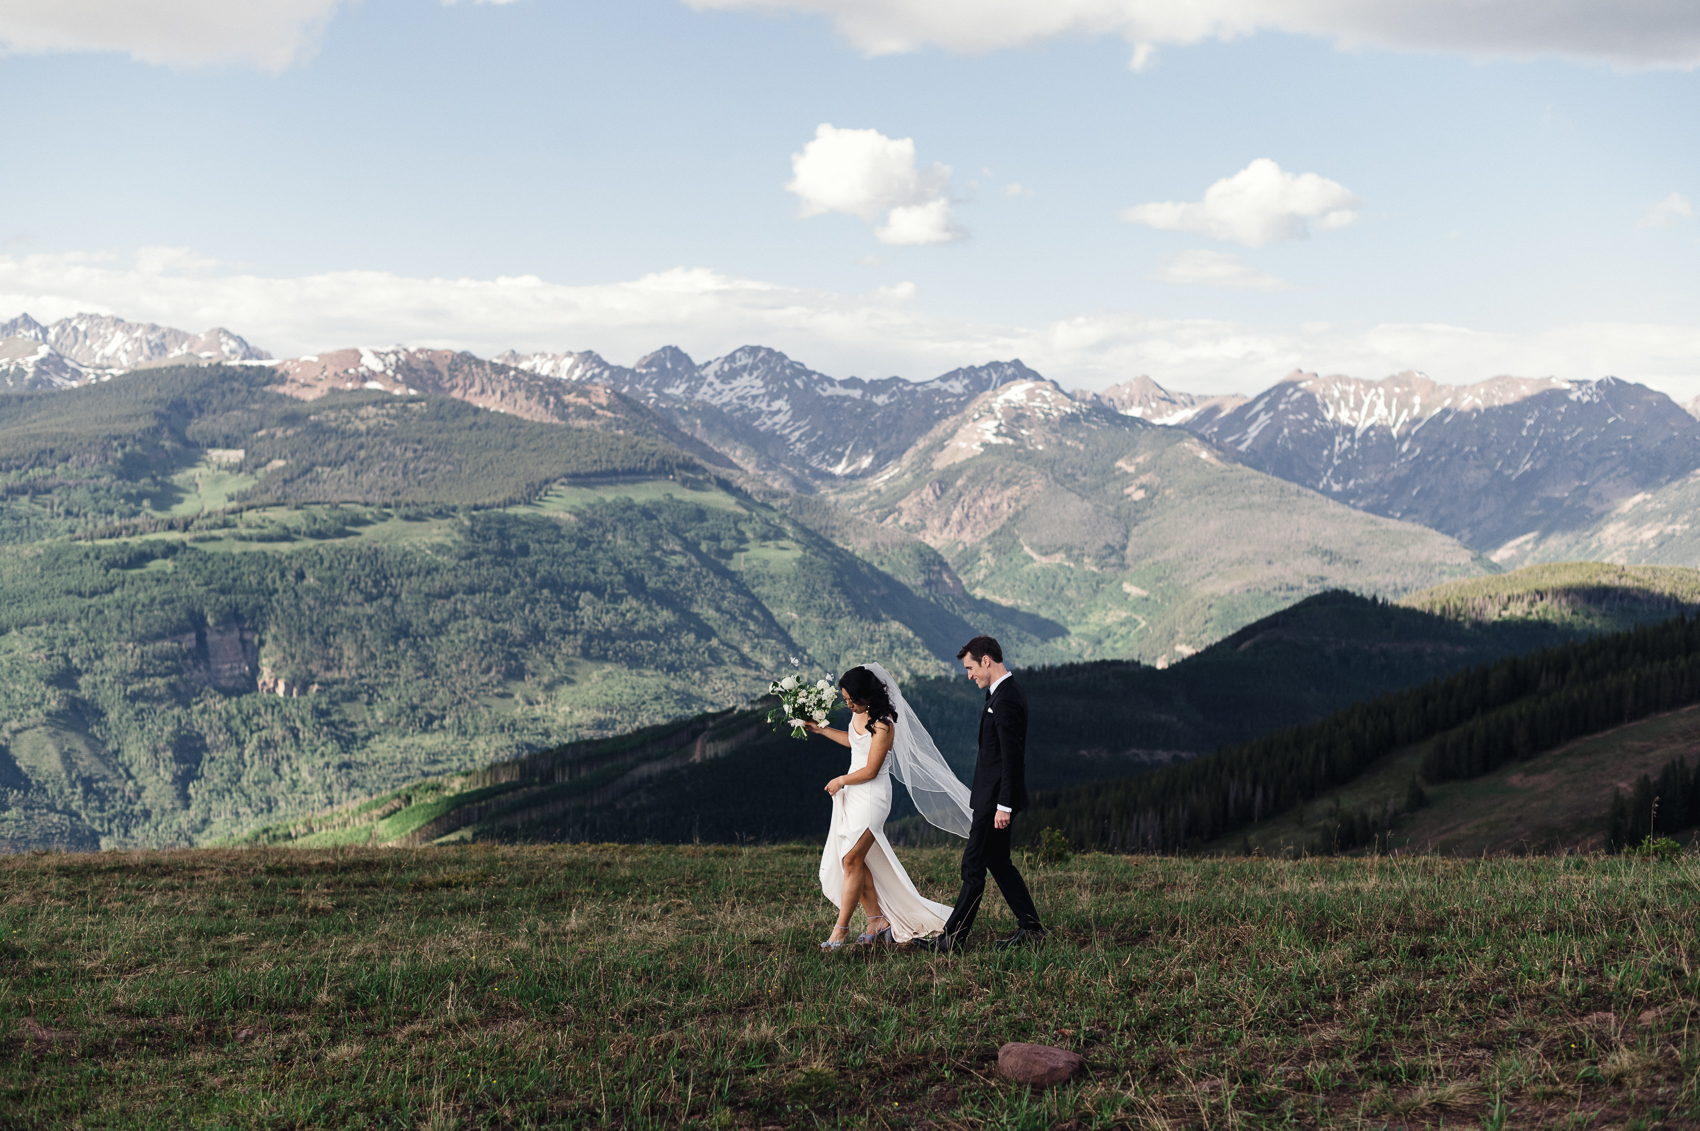 The 10th Vail Wedding couples photos on the top of the mountain